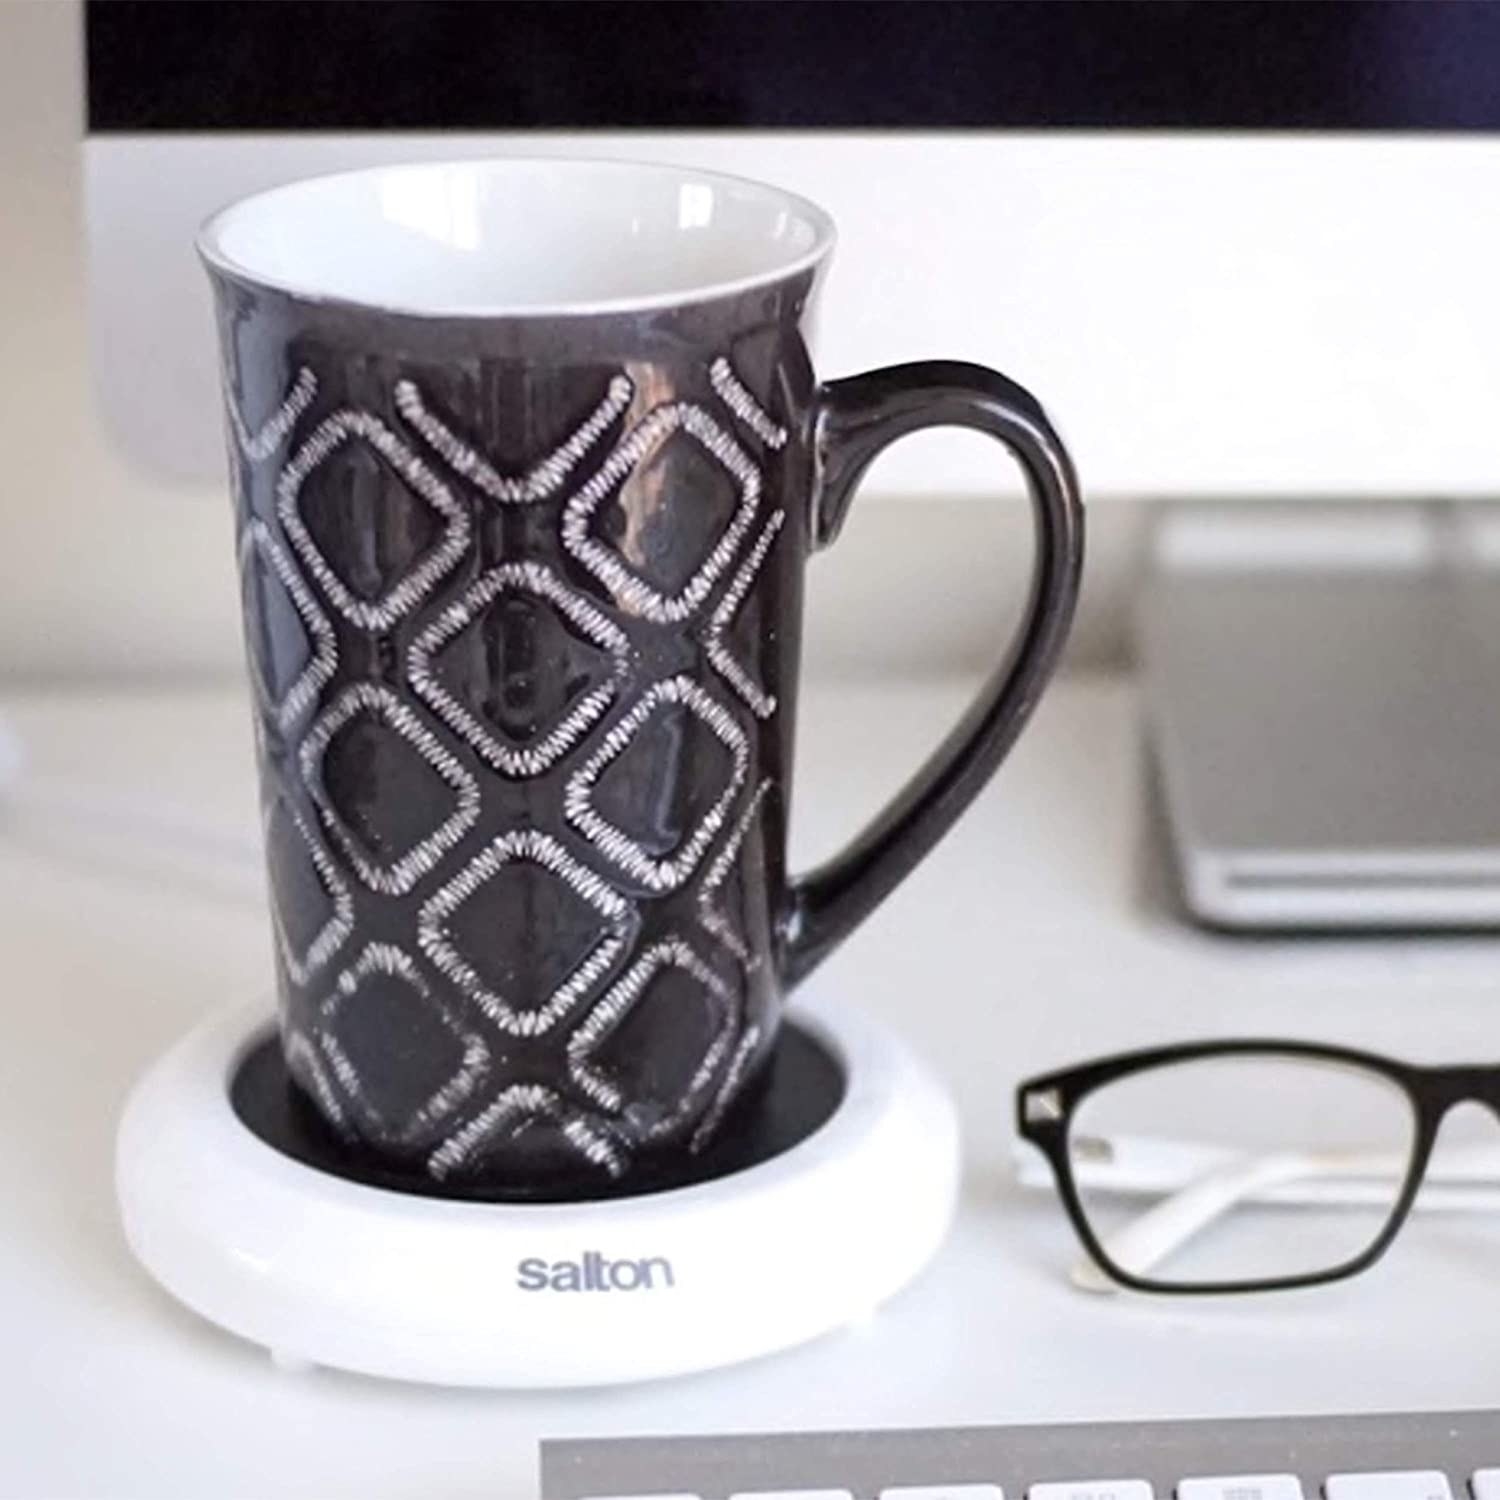 The beverage warmer with a patterned mug on it on a desk